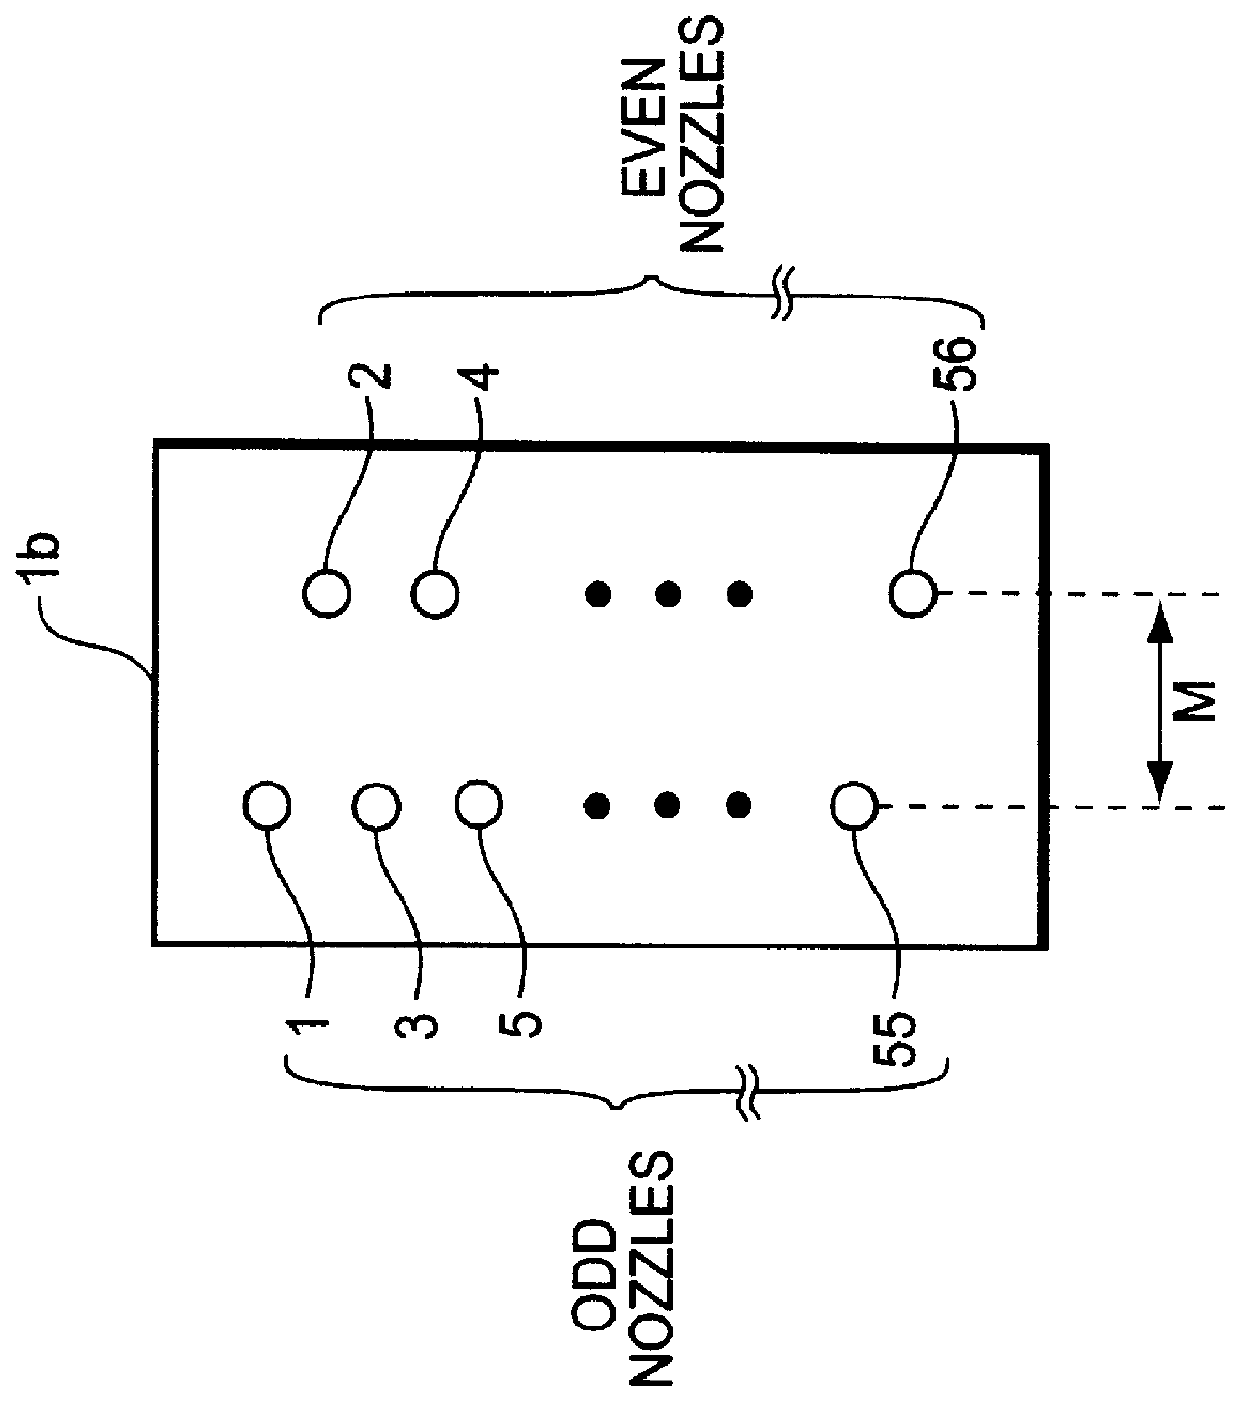 Circuit and method for controlling print heads of ink-jet printer